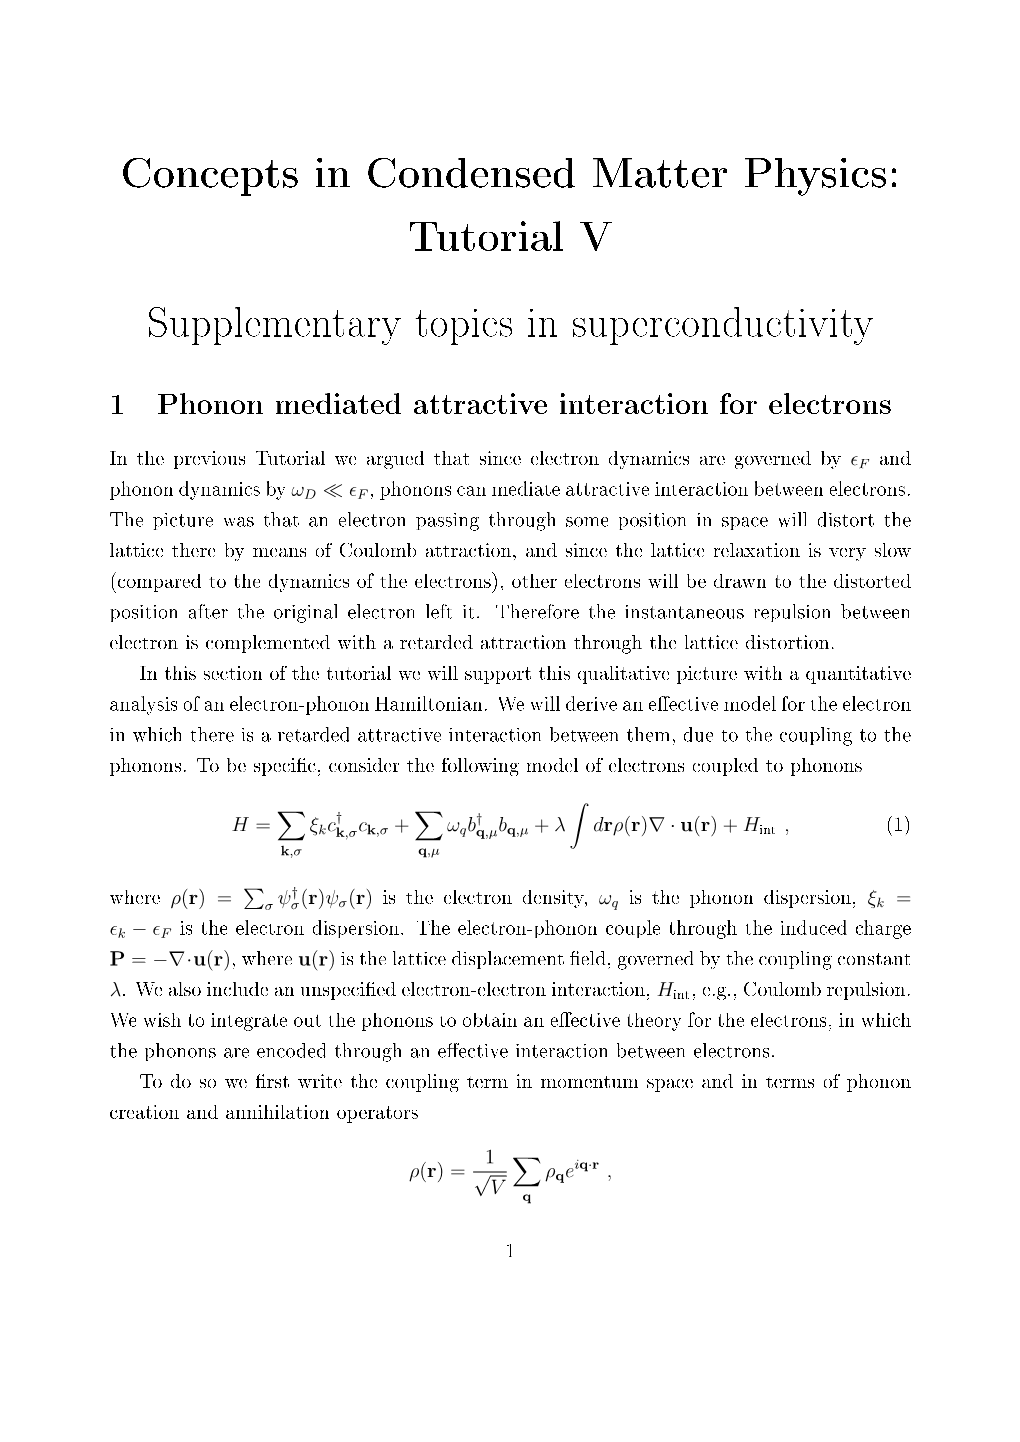 Concepts in Condensed Matter Physics: Tutorial V